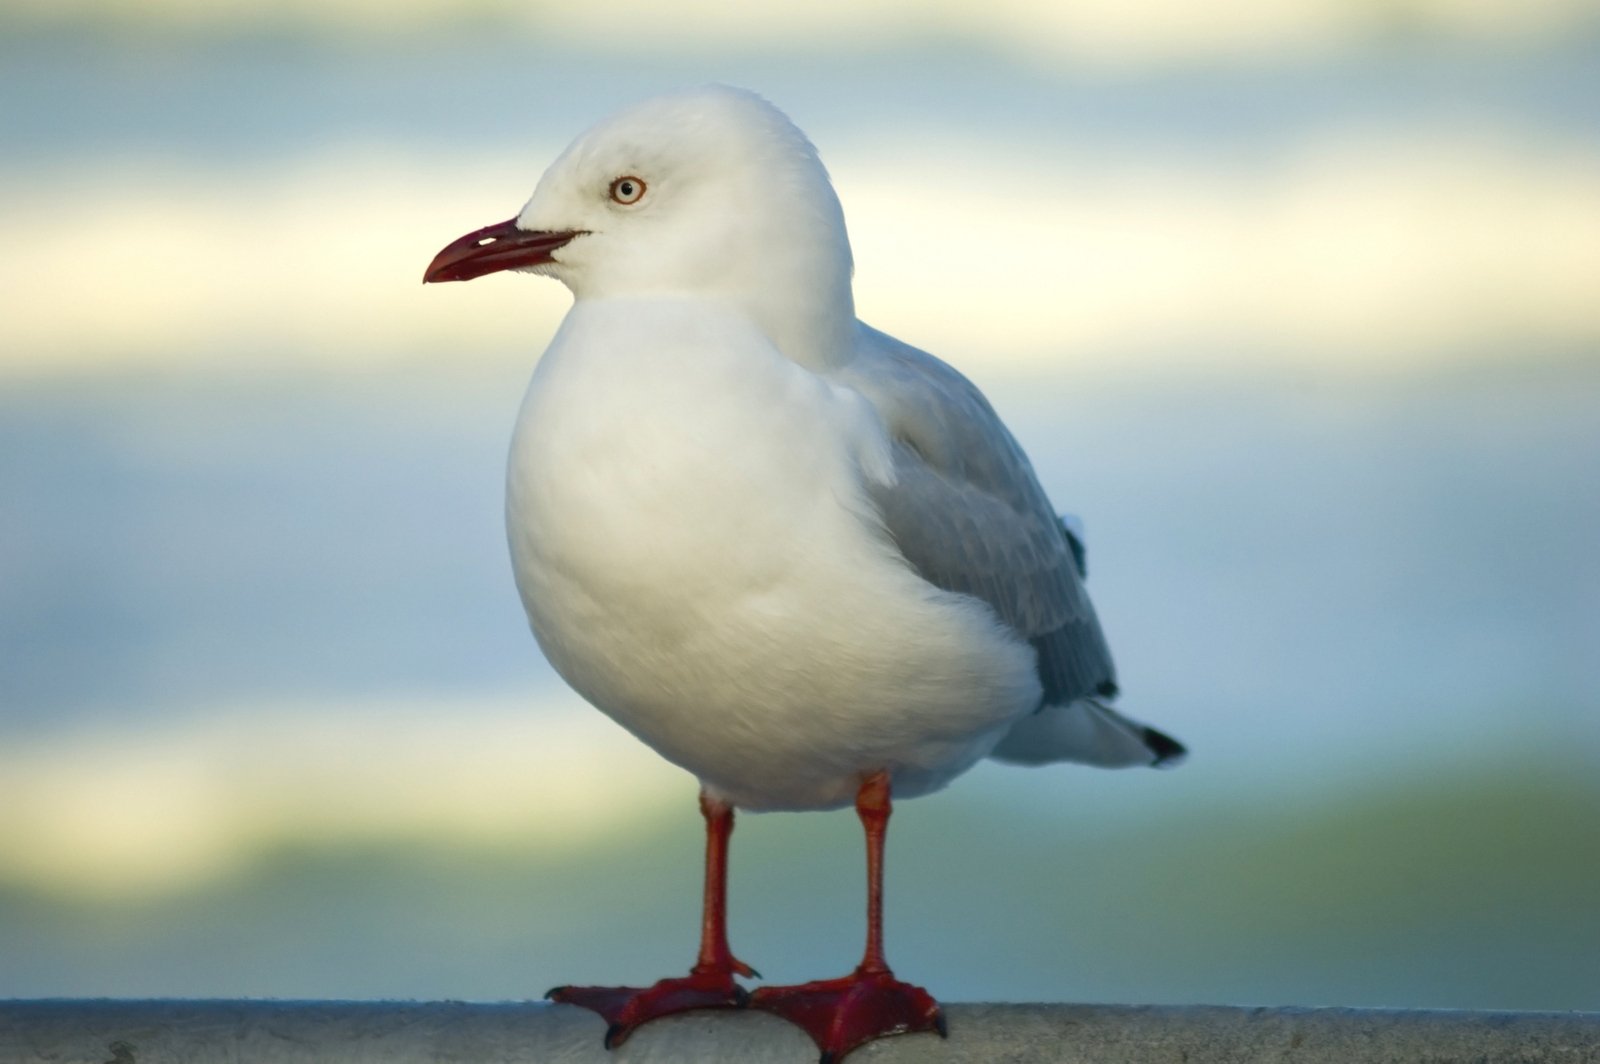 a seagull sitting on a ledge near water